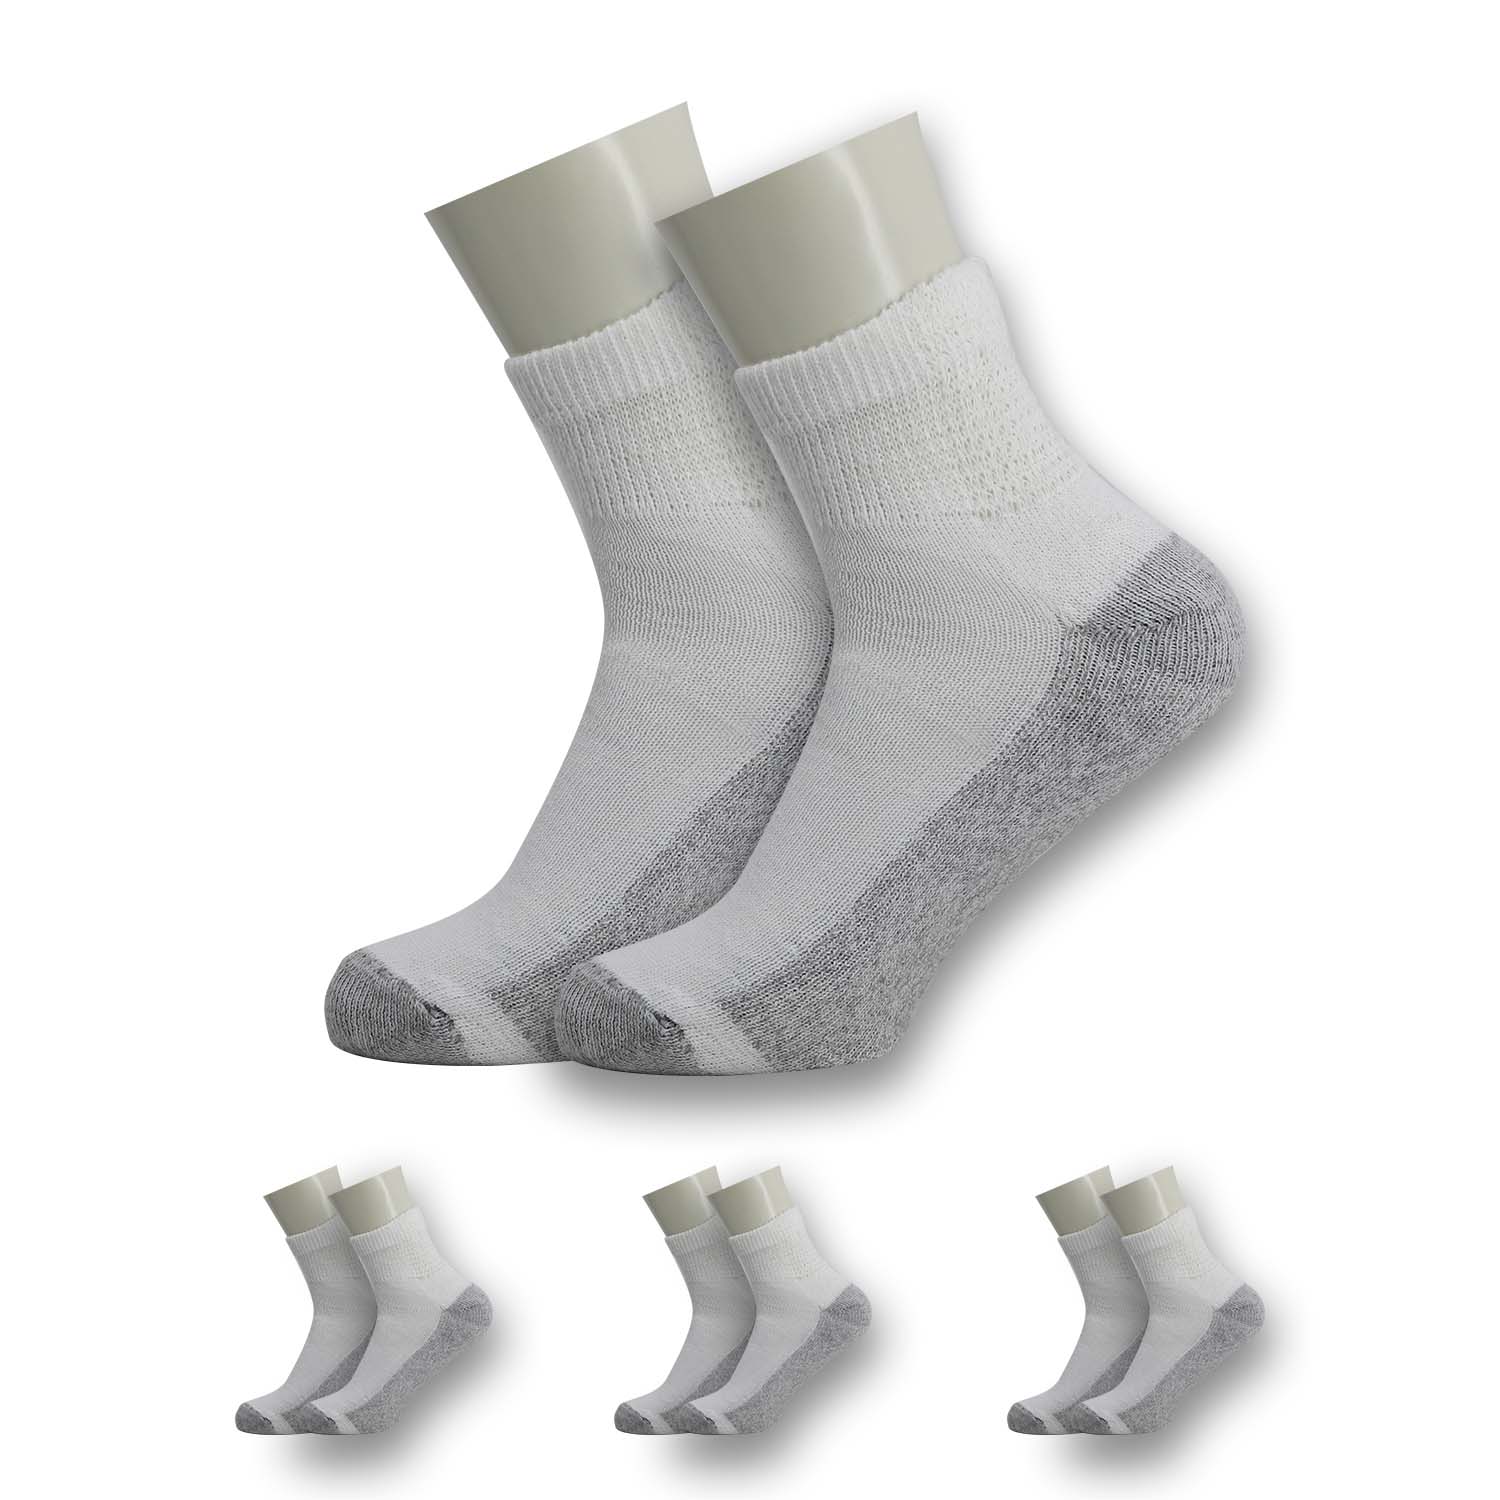 Men's Ankle Wholesale Socks, Size 10-13 In White With Grey- Bulk Case Of 120 Pairs